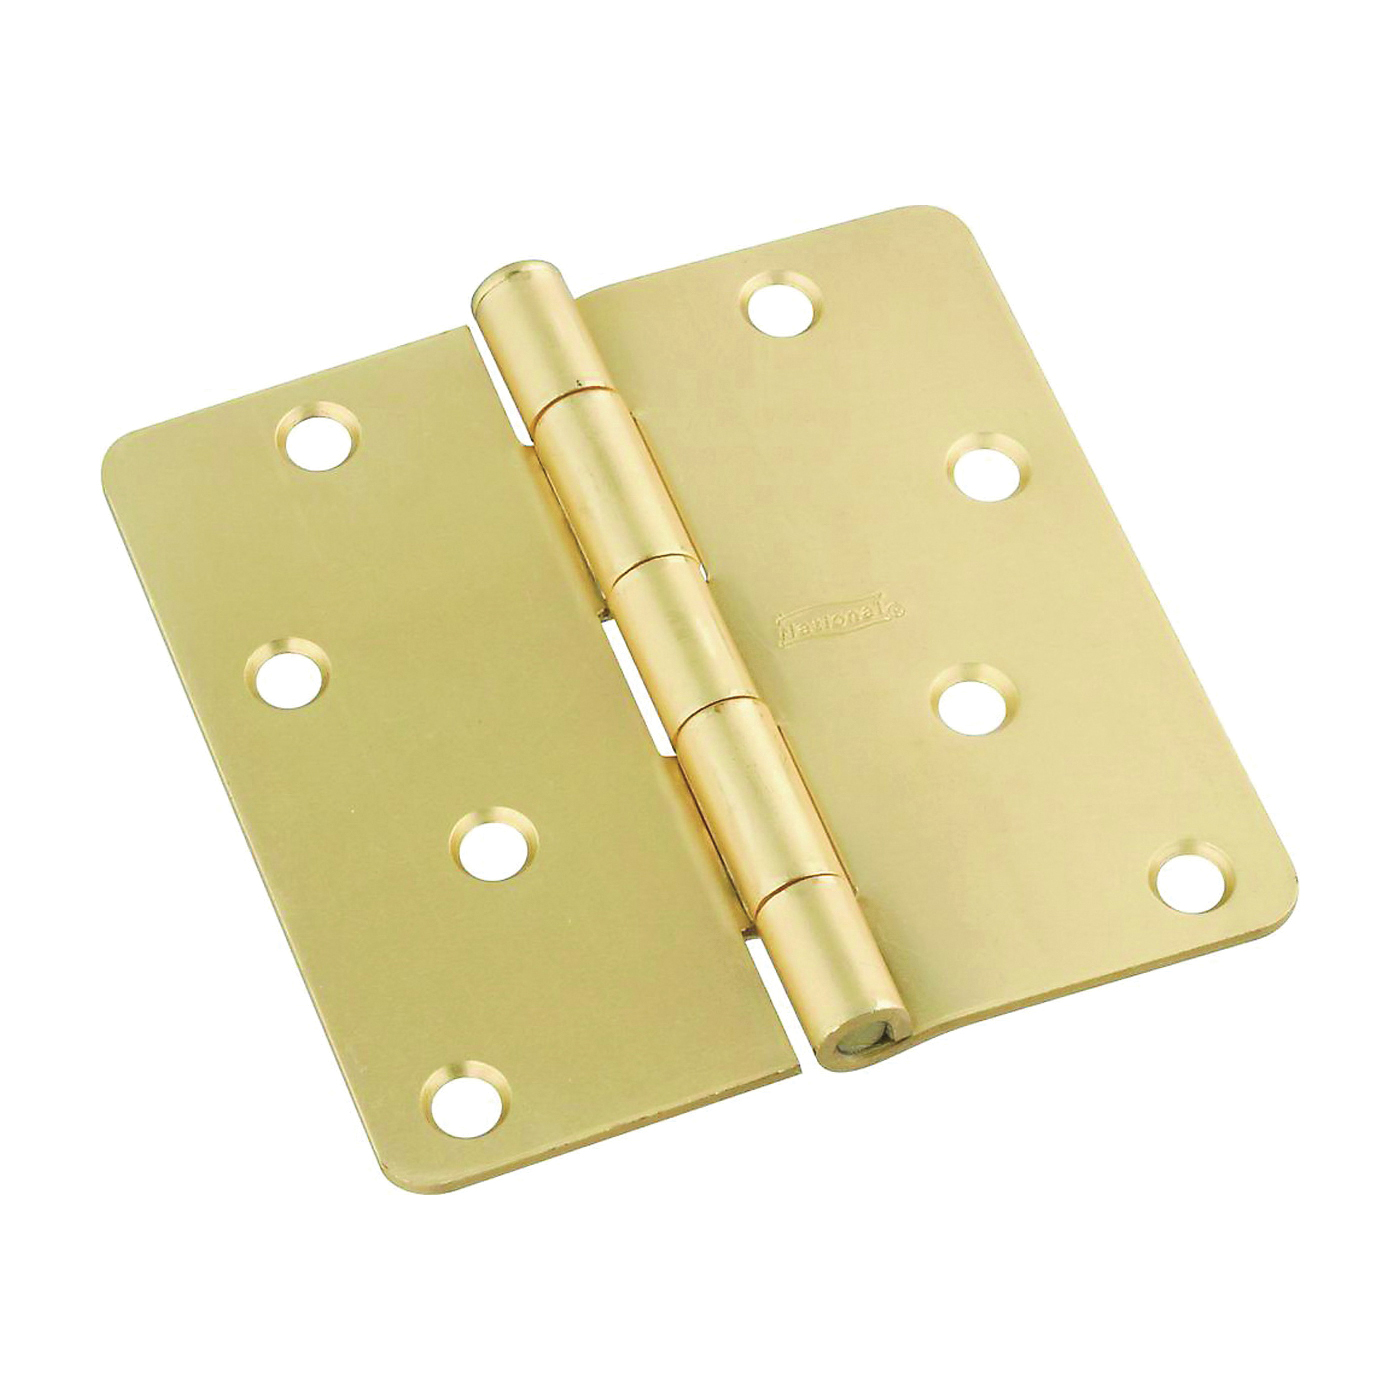 N830-228 Door Hinge, Cold Rolled Steel, Satin Brass, Non-Rising, Removable Pin, Full-Mortise Mounting